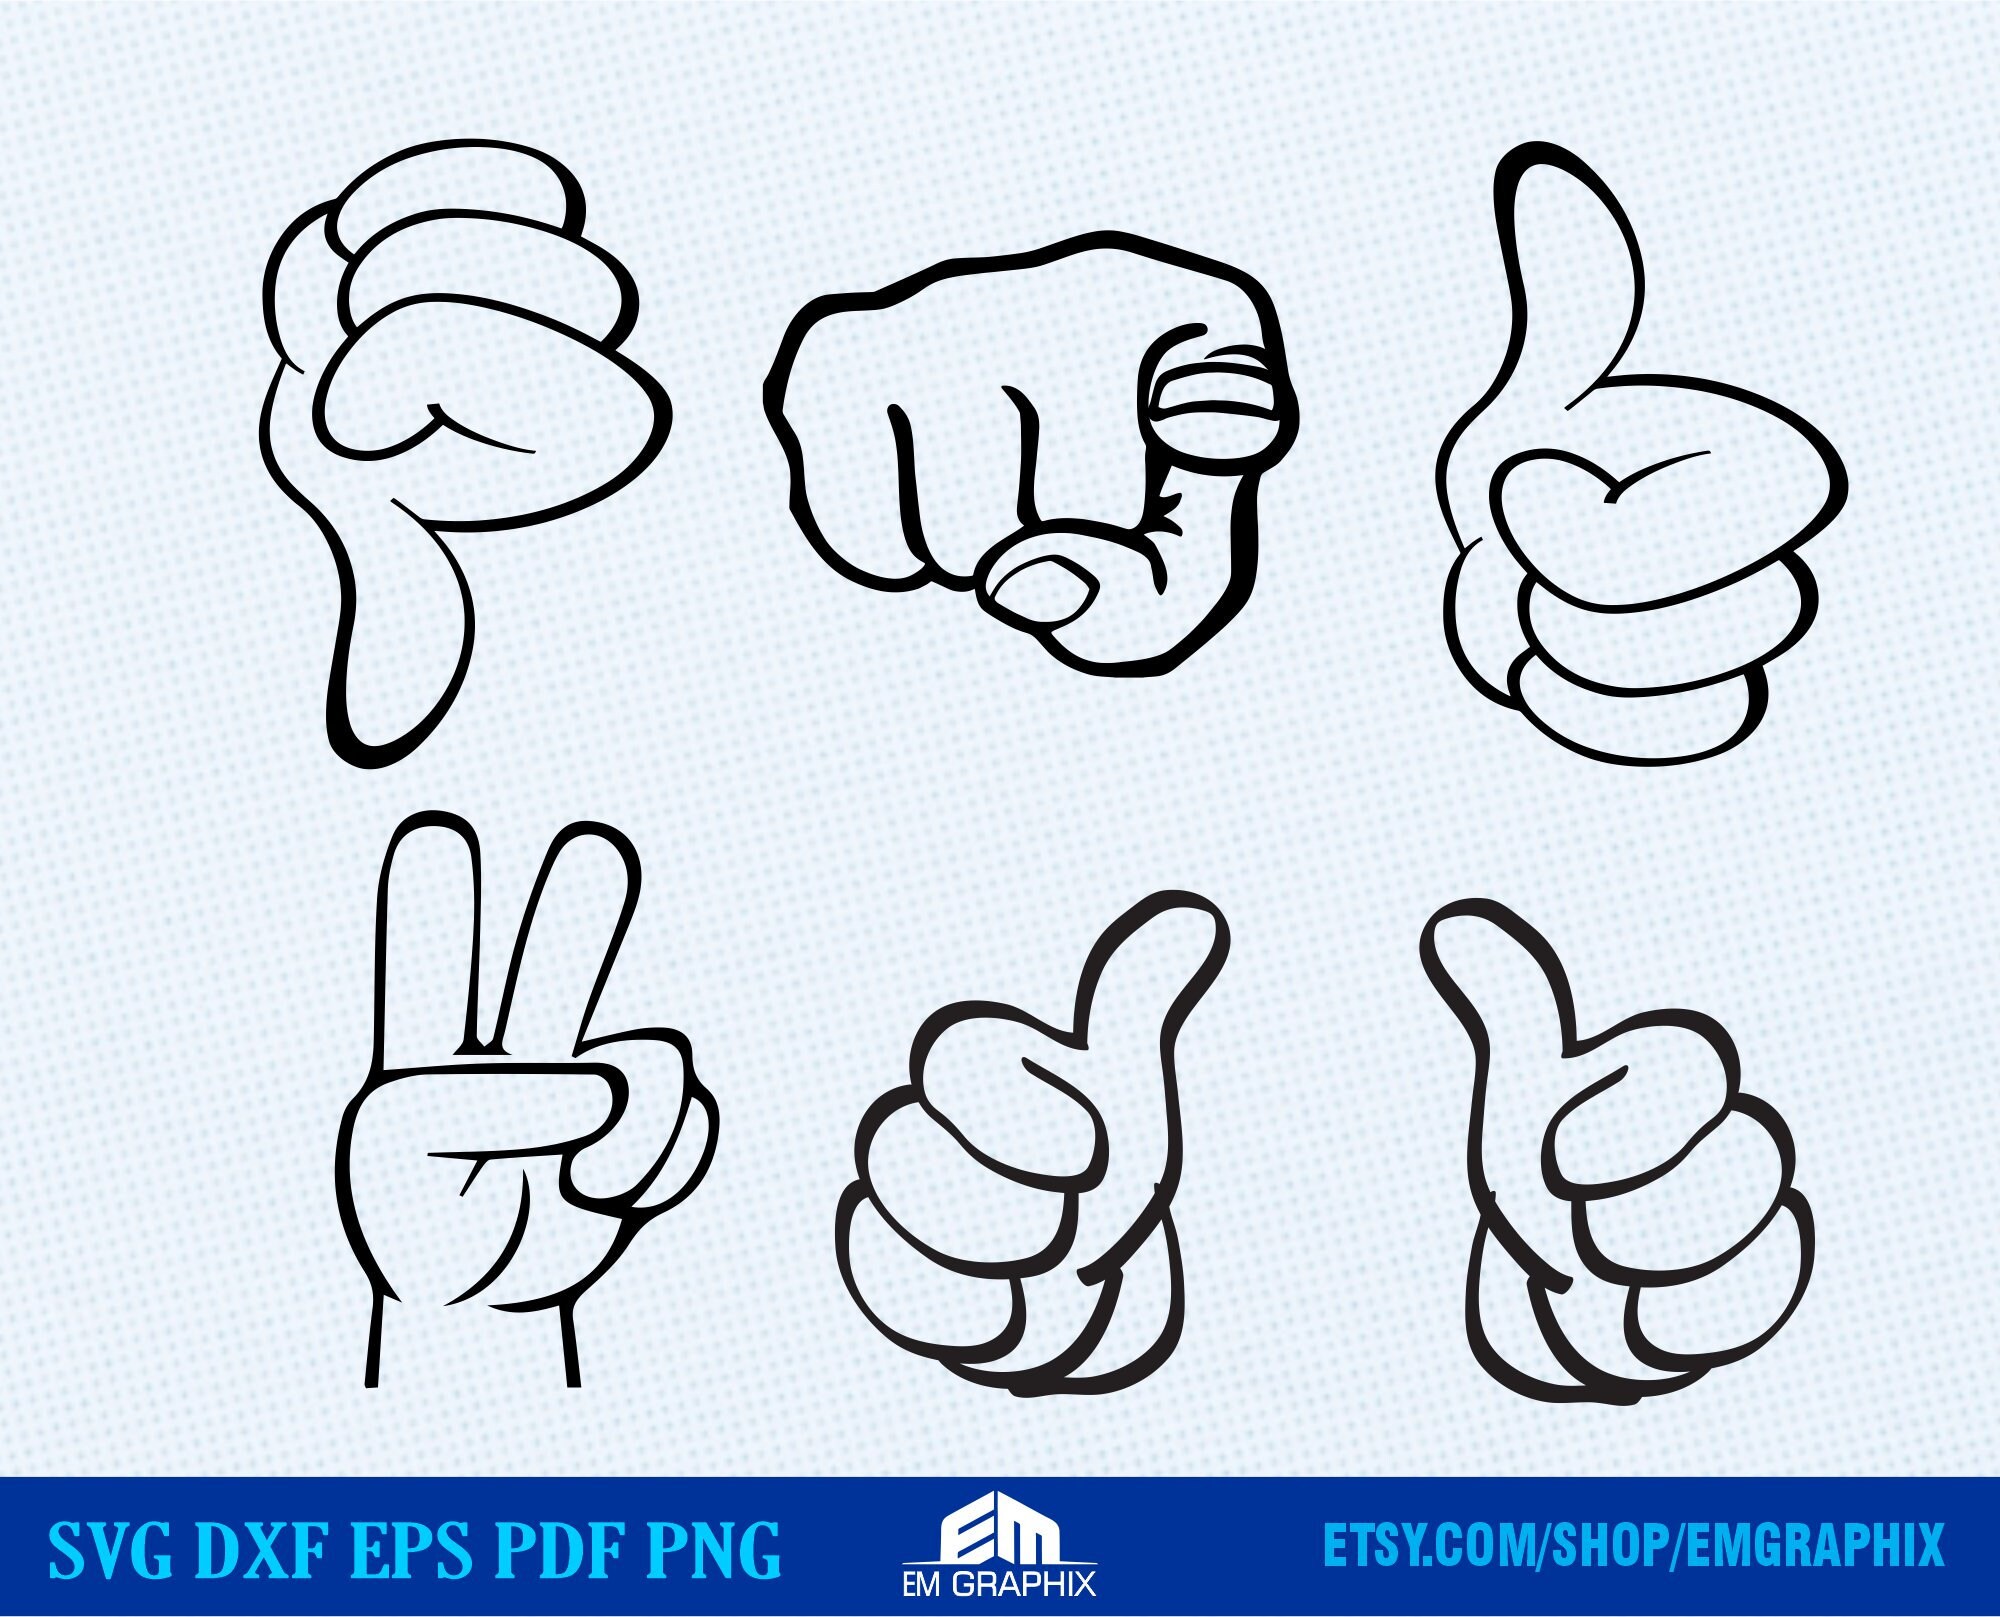 Thumbs Up/ Gig'em Double Sided Cup Set